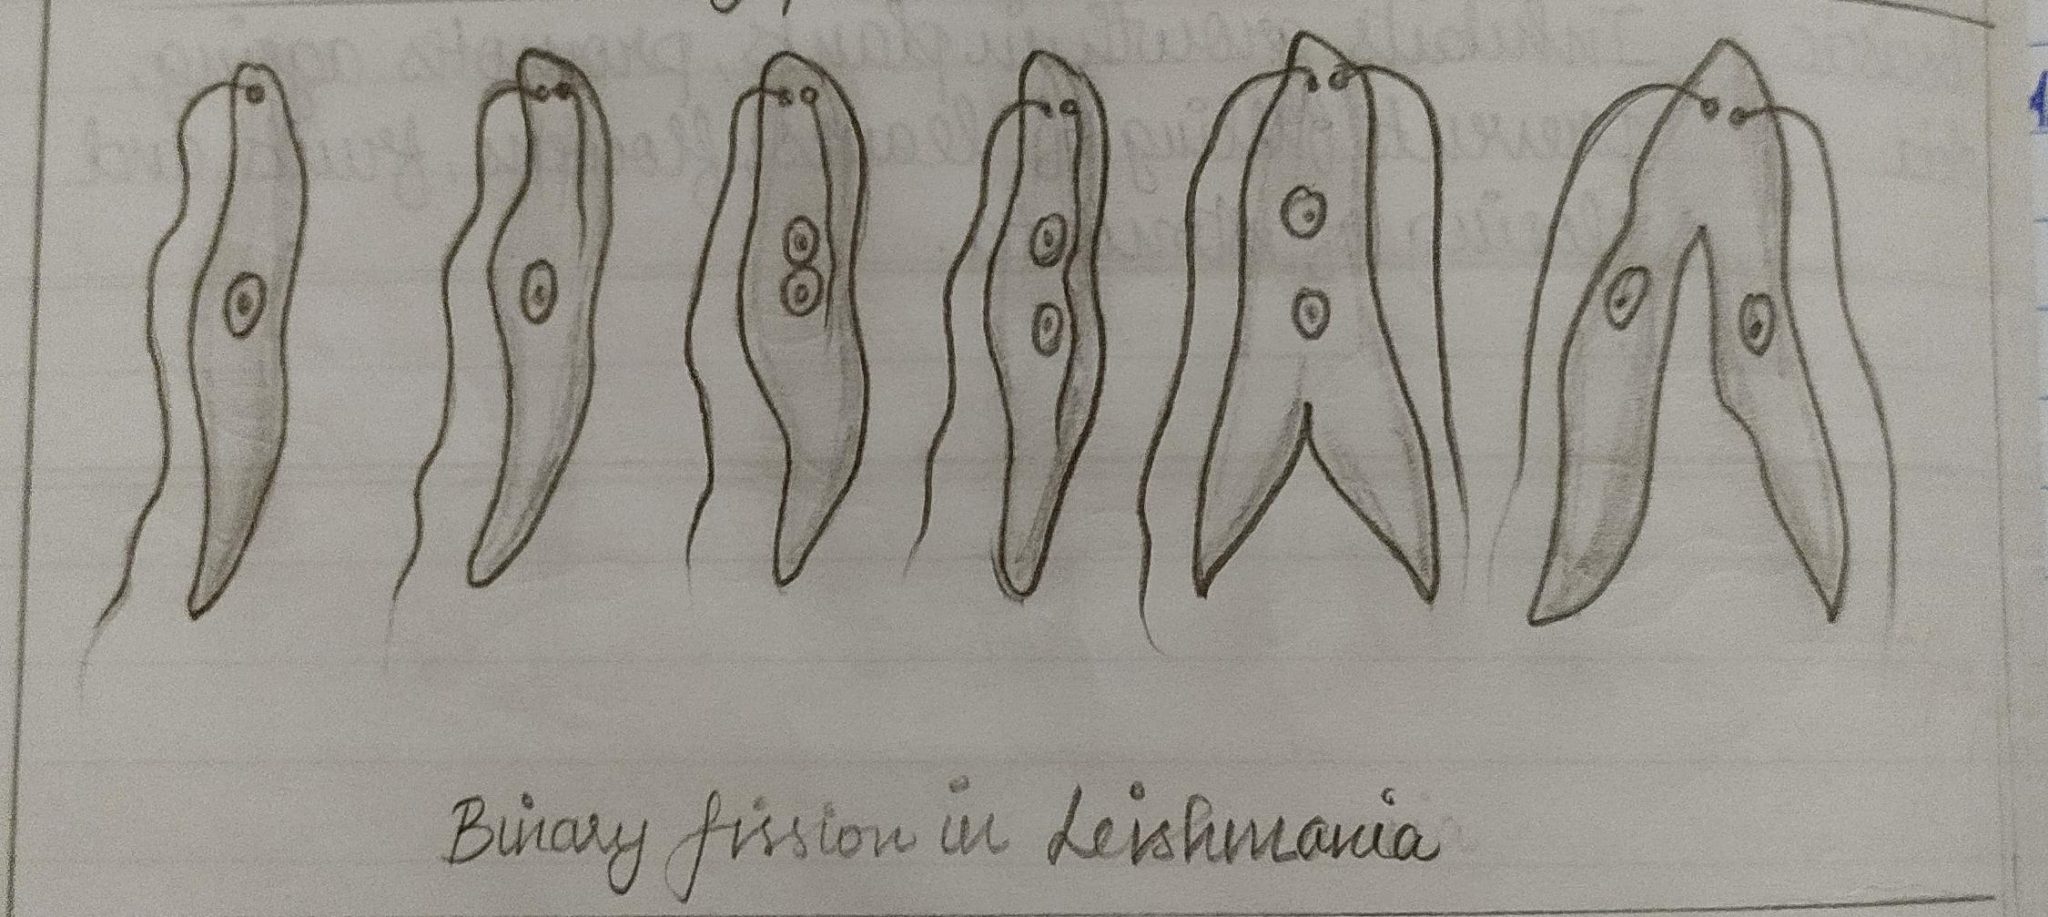 binary fission example drawing